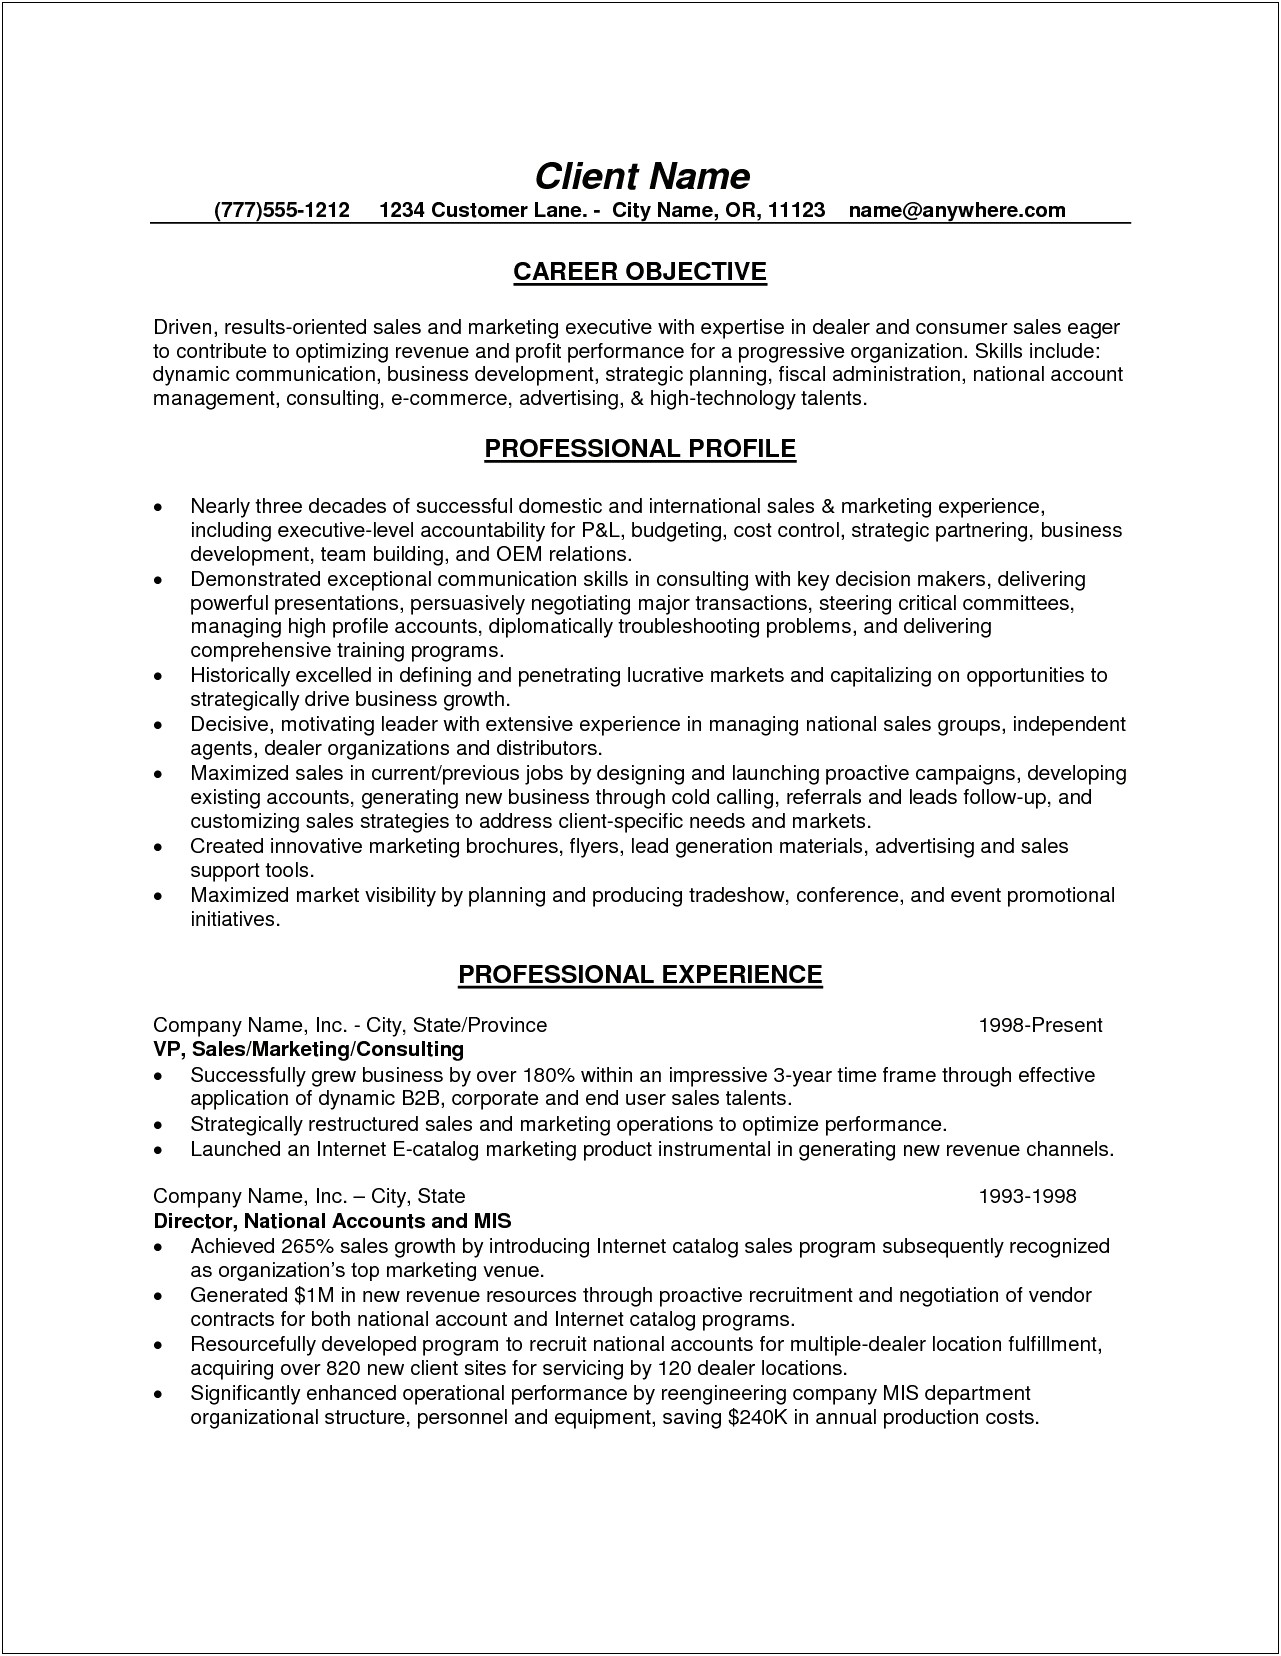 Example Of General Career Objective For Resume